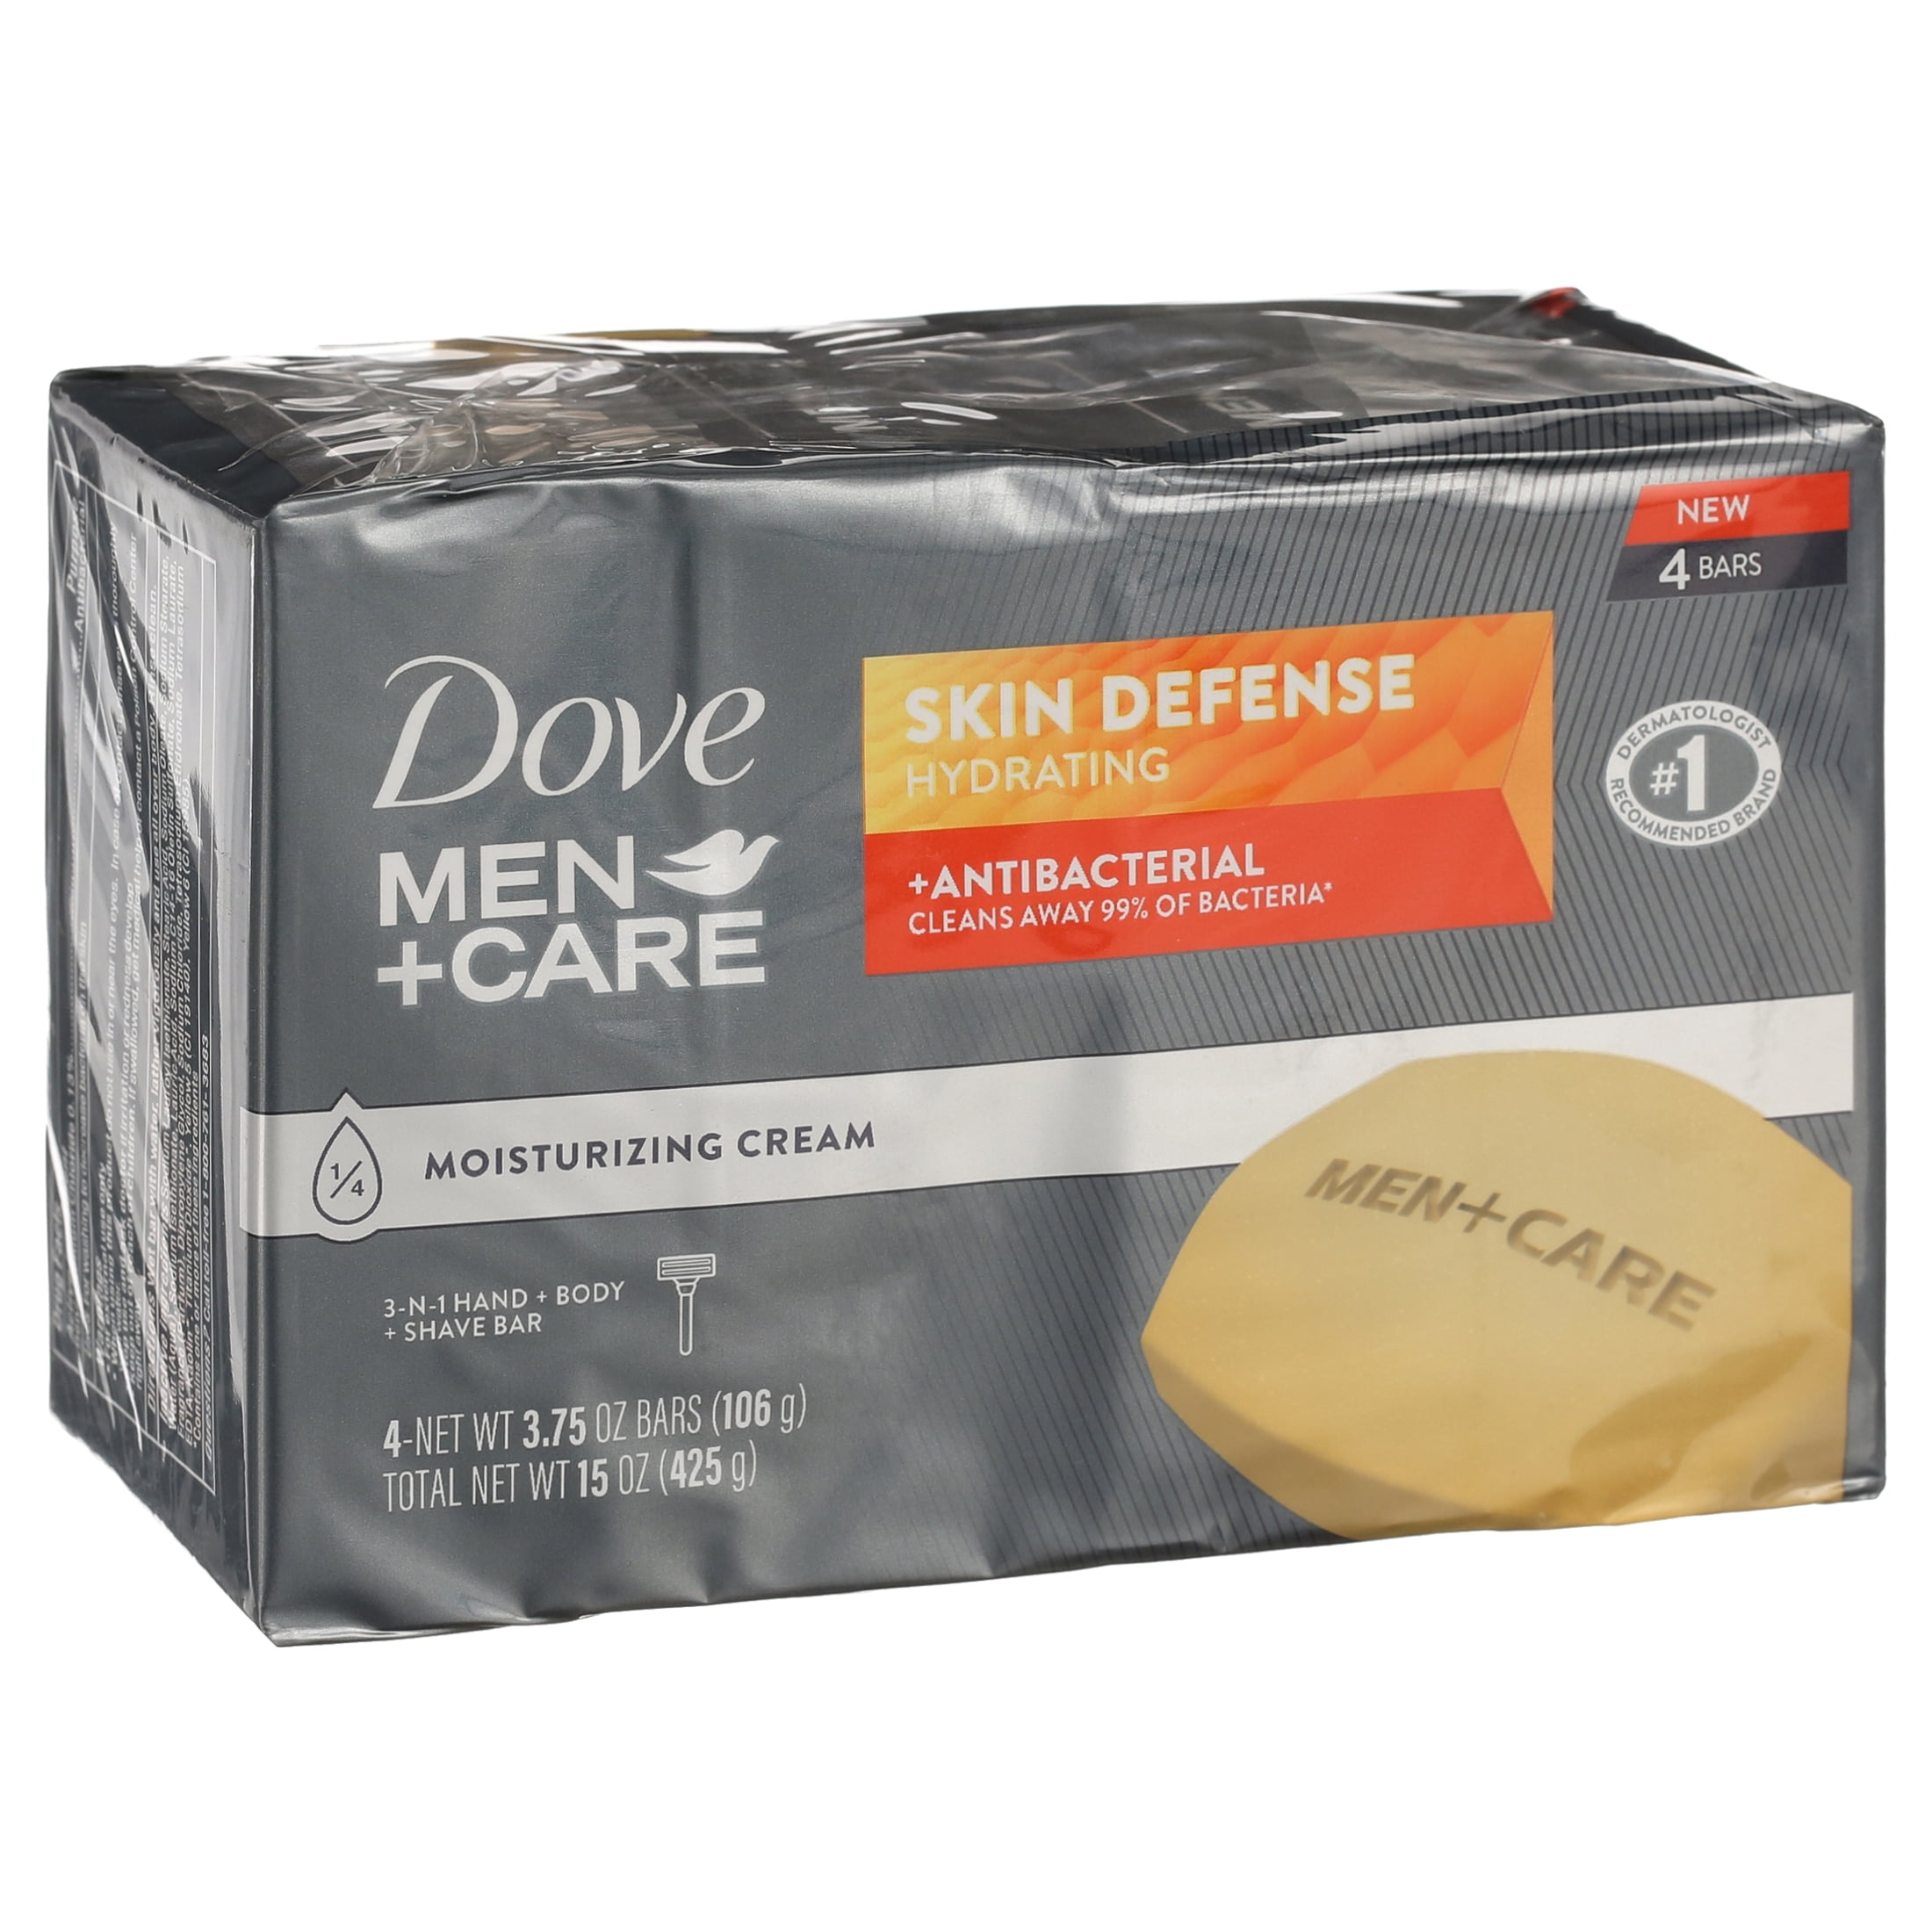 Dove Men+Care Skin Defense Hydrating Antibacterial 3-N-1 Hand, Body and Shave Bar, 3.75 Oz Count 4